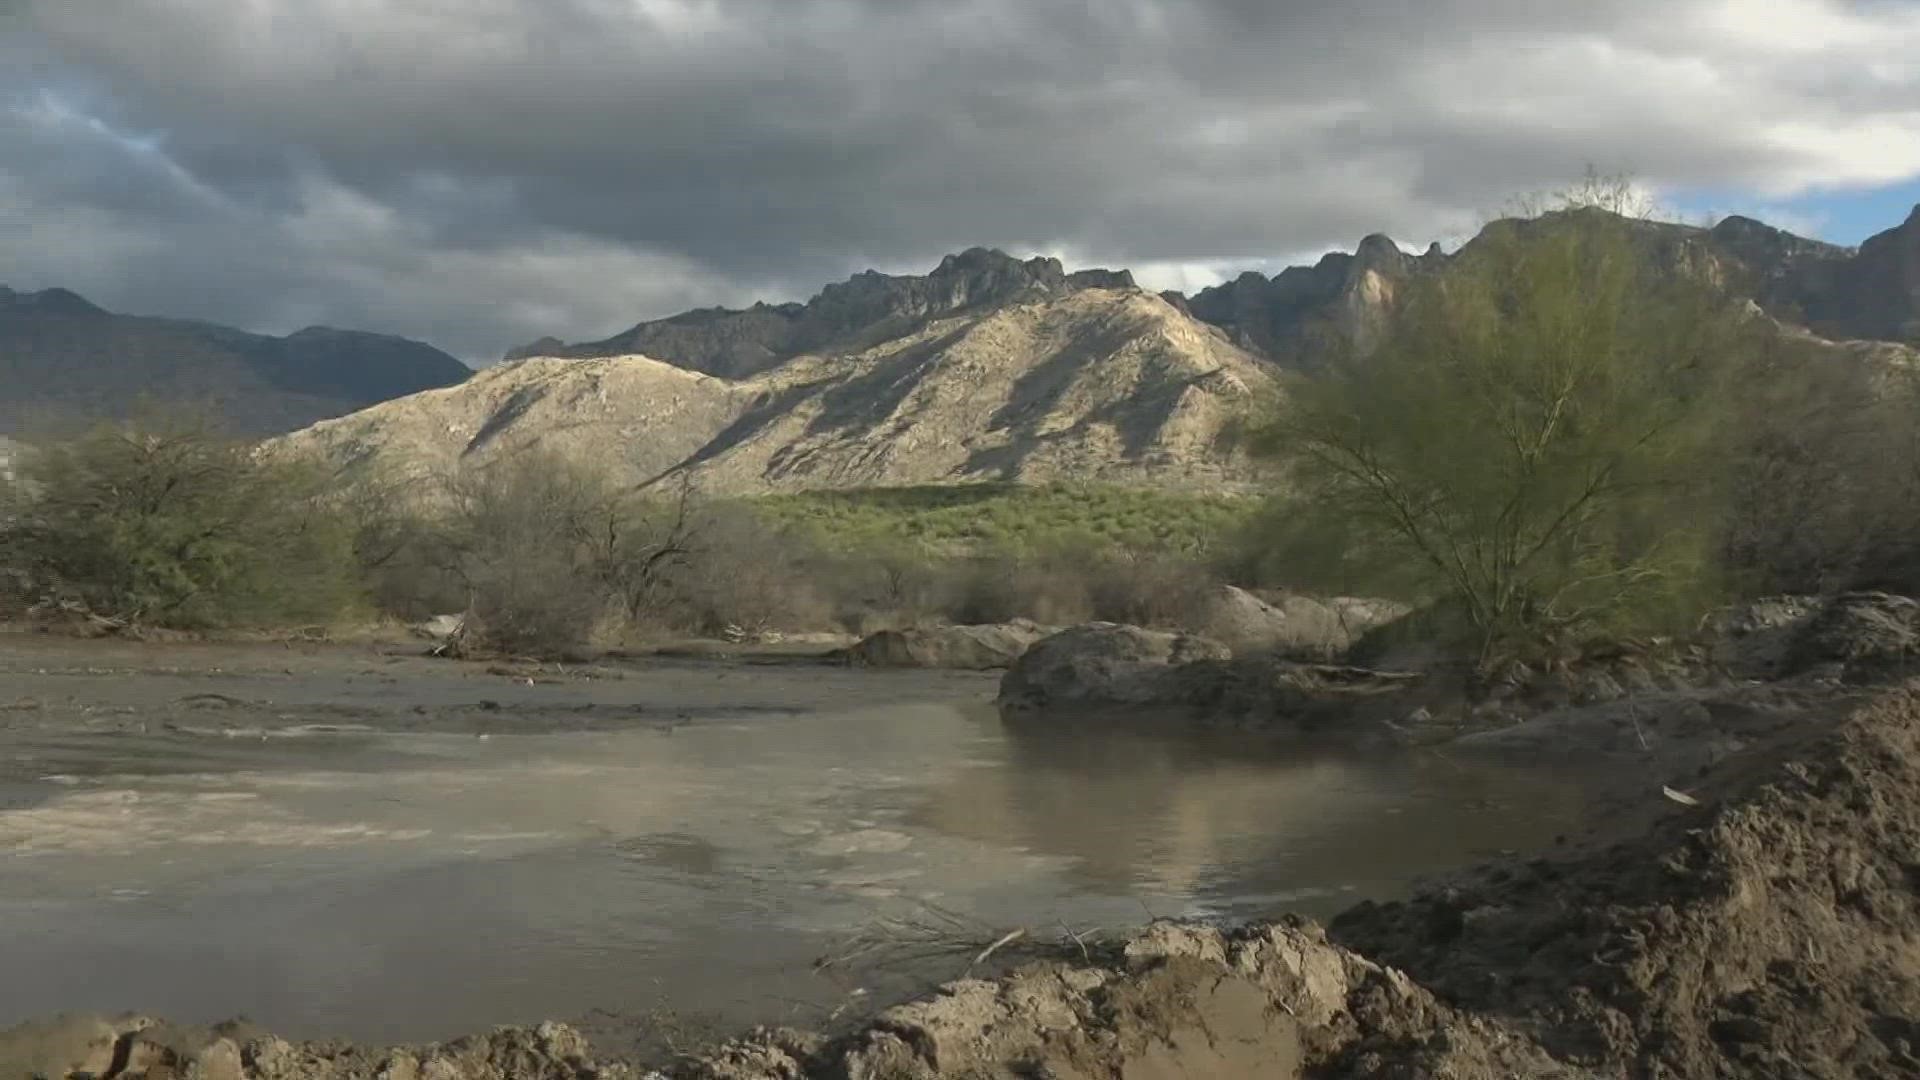 Authorities are trying to rescue around 300 campers who are stranded at a park near Tucson due to flooding from recent rain storms.